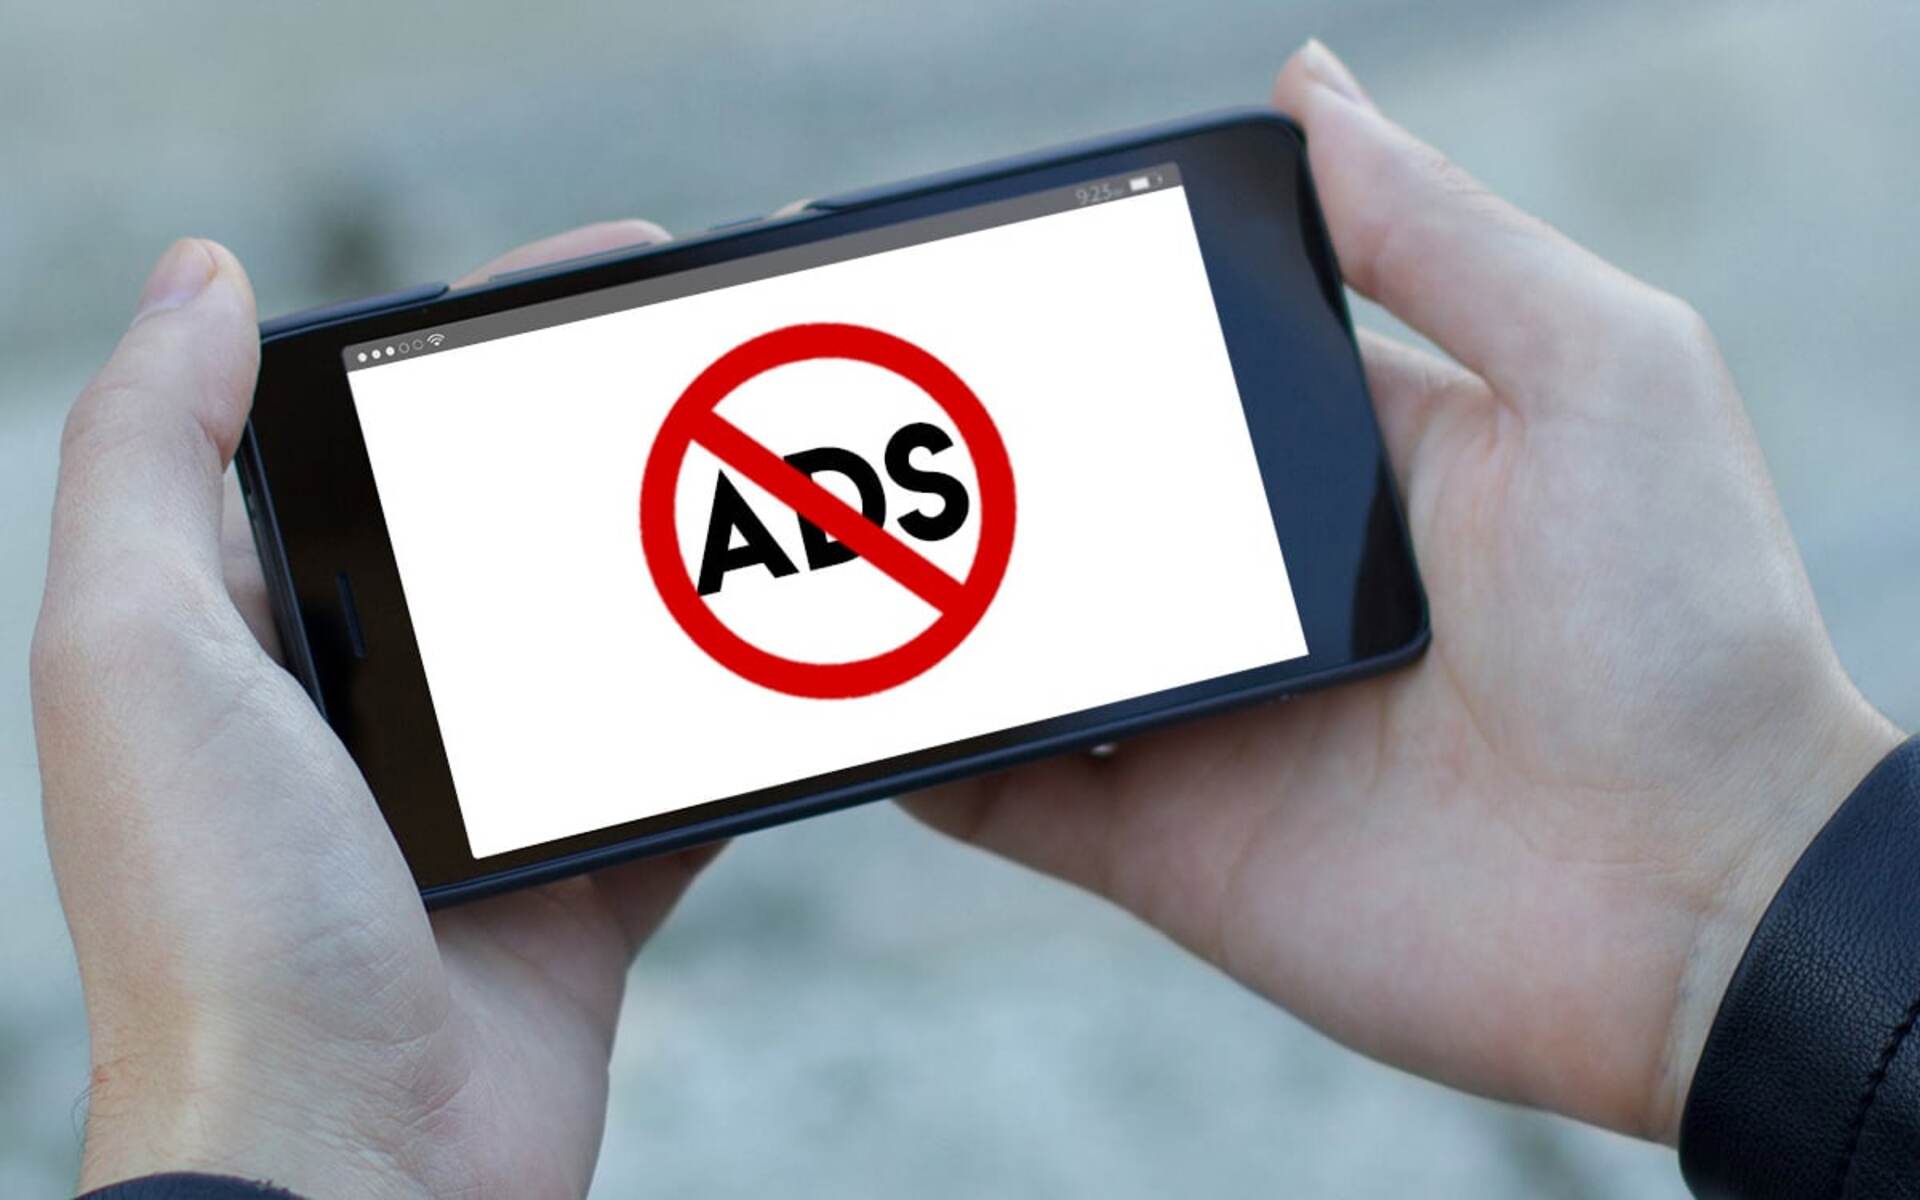 How To Get Rid Of Pop Up Ads On Smartphone